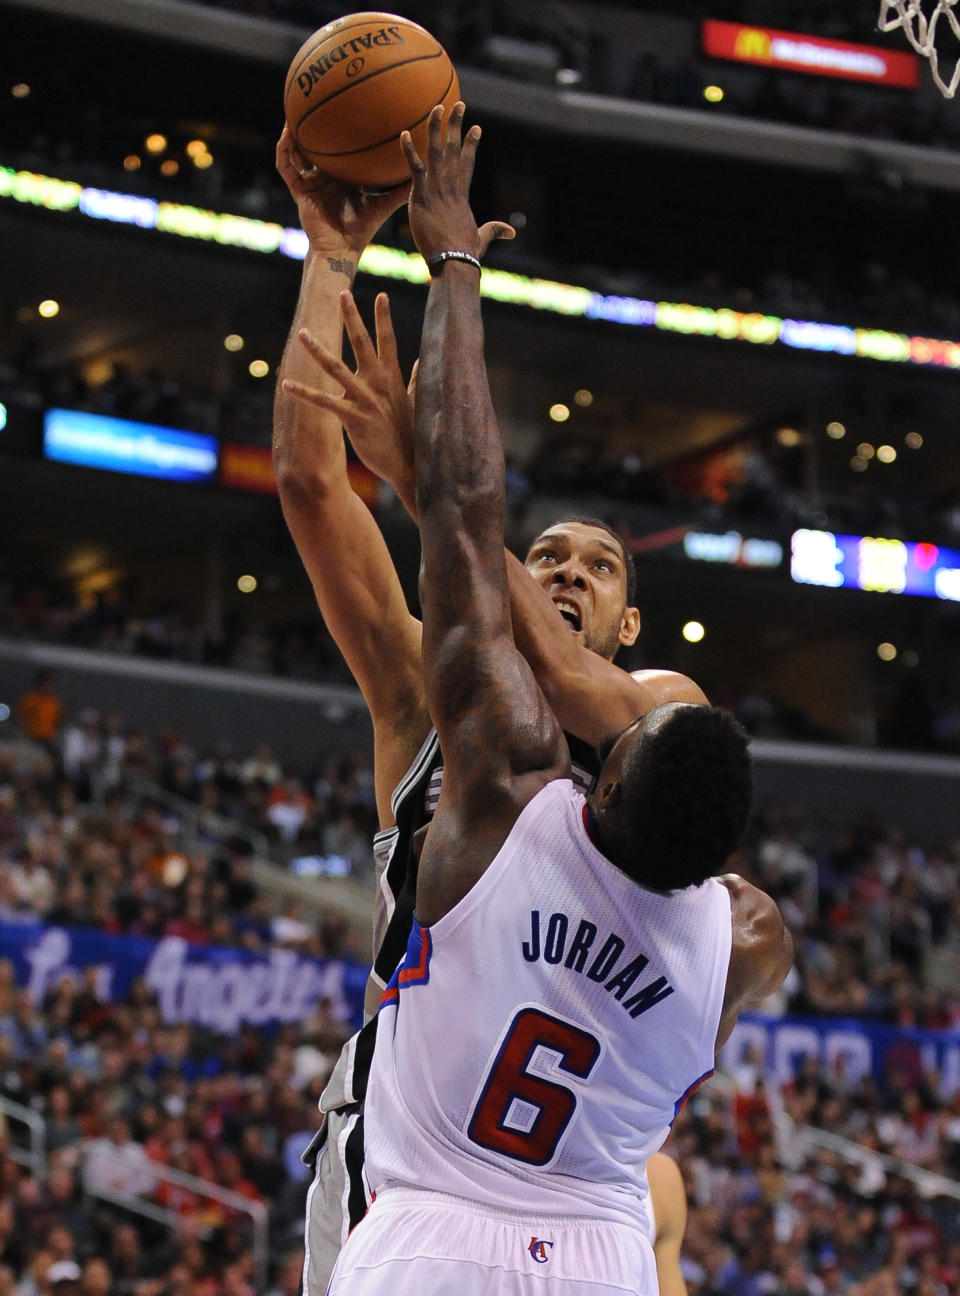 San Antonio Spurs forward Tim Duncan, back center, battles Los Angeles Clippers center DeAndre Jordan (6) as he makes a basket in the first half of a NBA basketball game, Tuesday, Feb. 18, 2014, in Los Angeles.(AP Photo/Gus Ruelas)